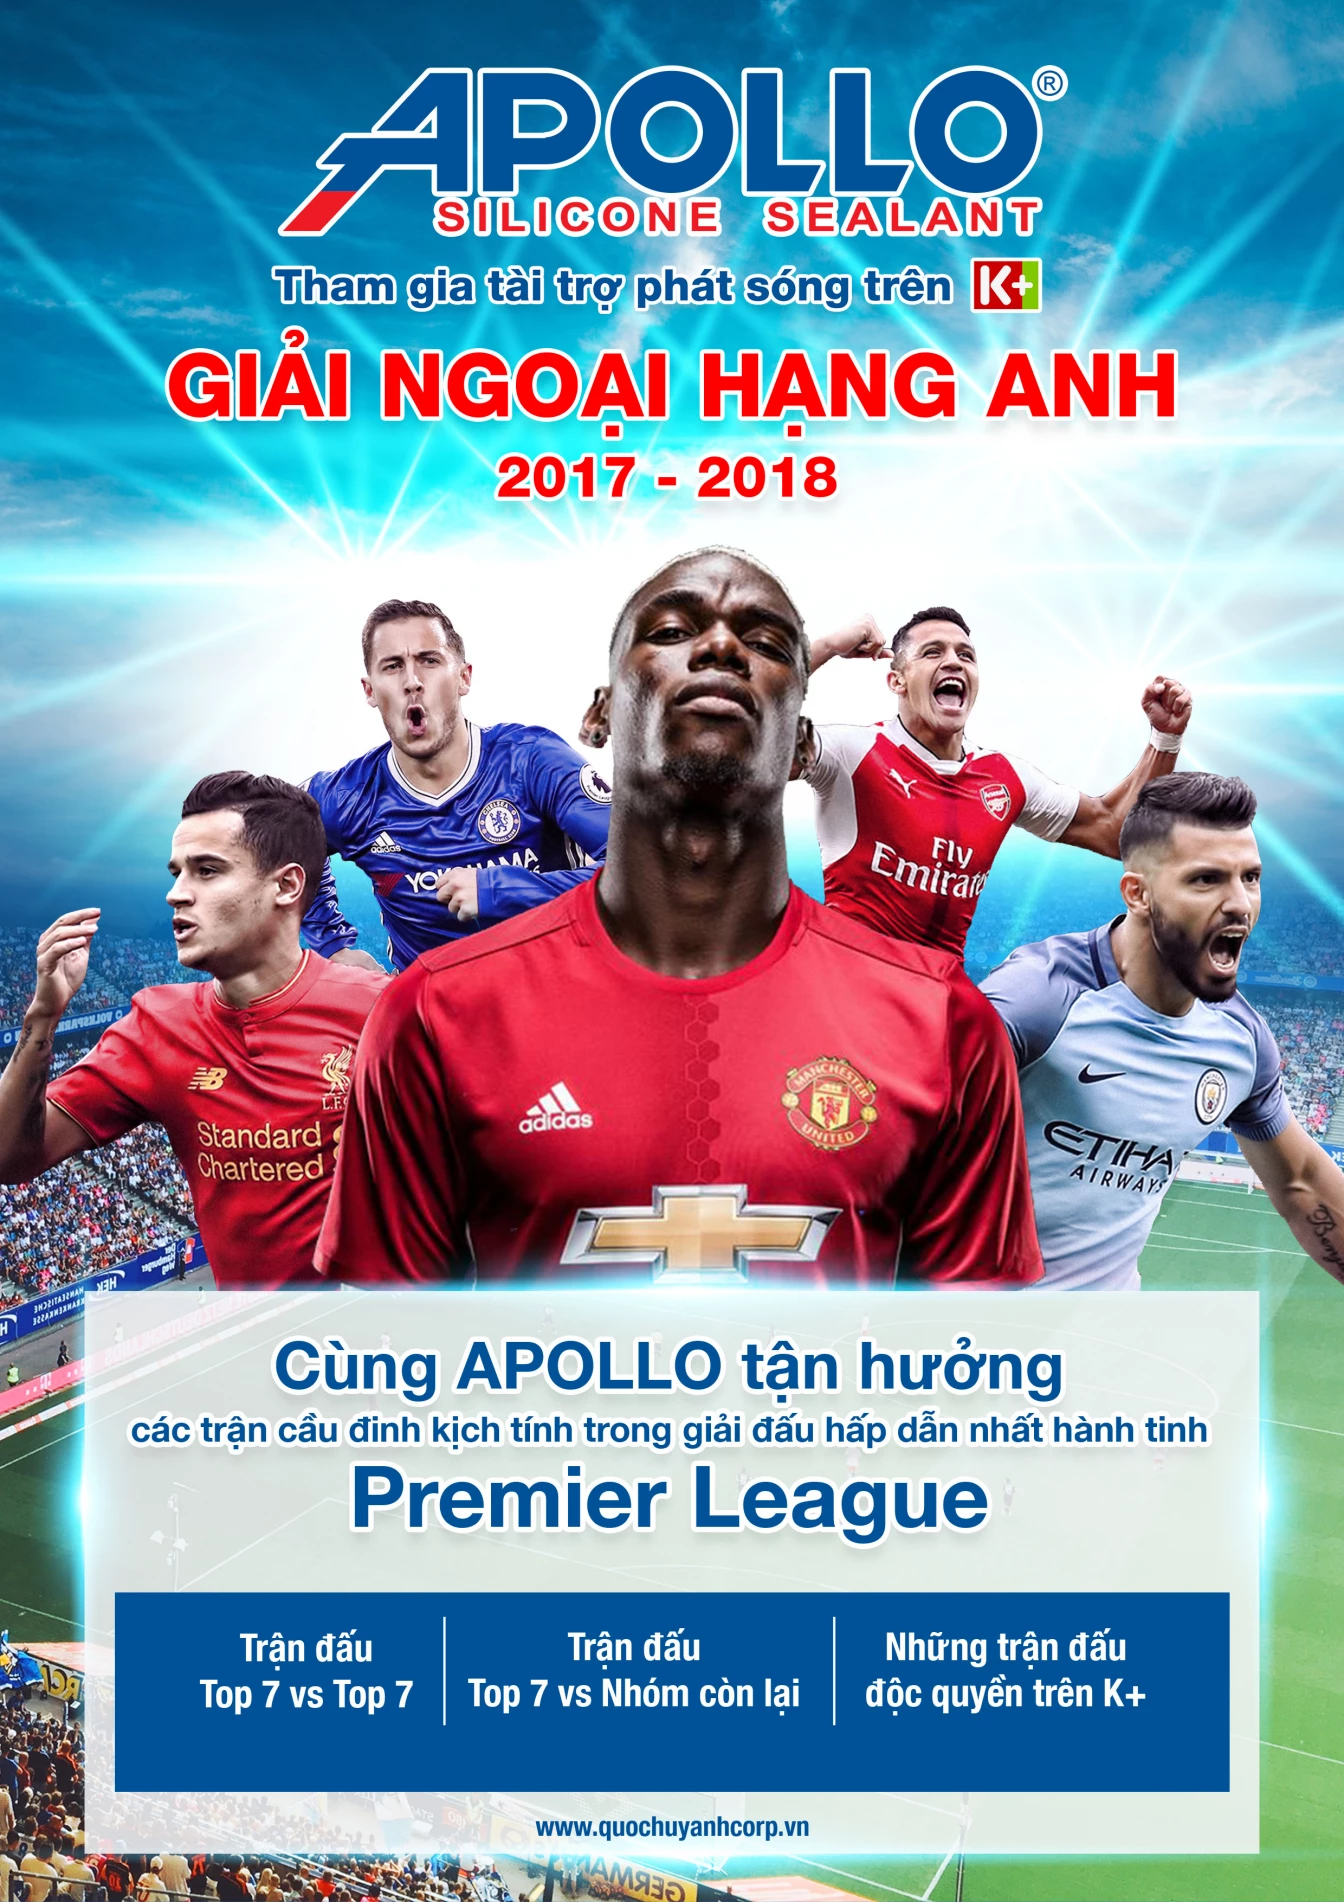 Apollo participates in sponsoring the broadcast of K+ channel of the English Premier League 2017-2018